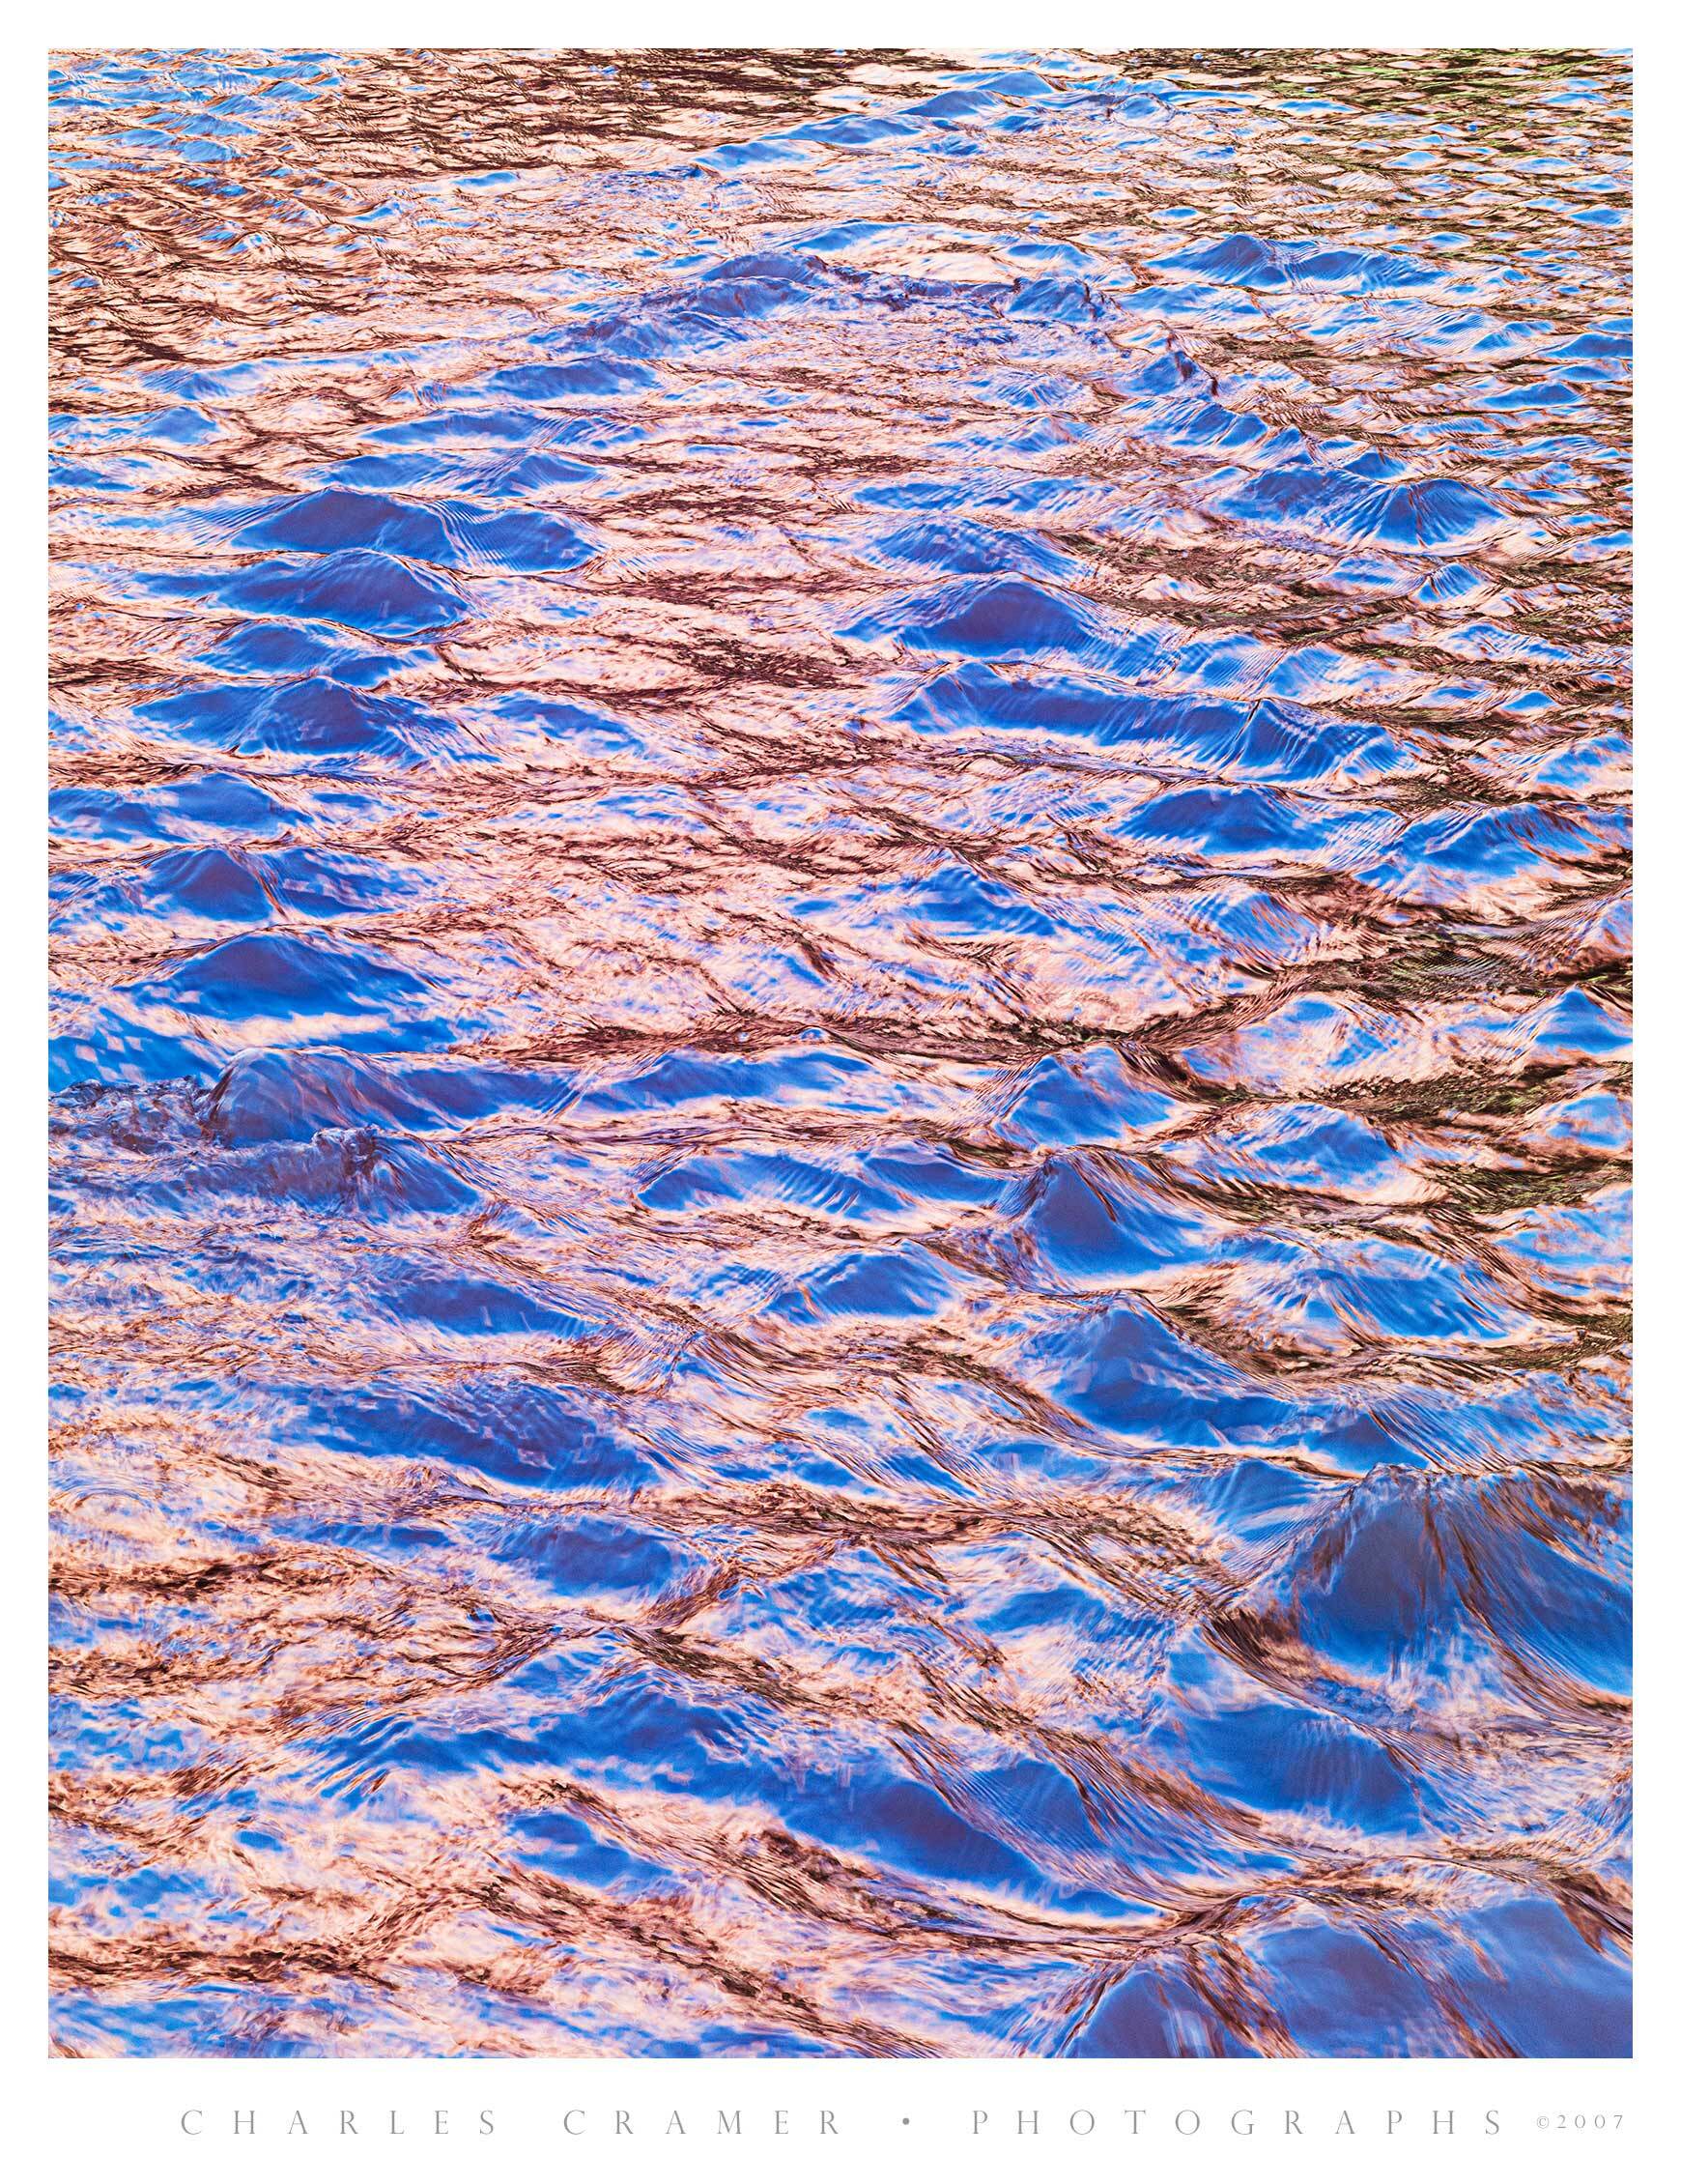 Water Ripples Reflecting Sky and Cliffs, Utah